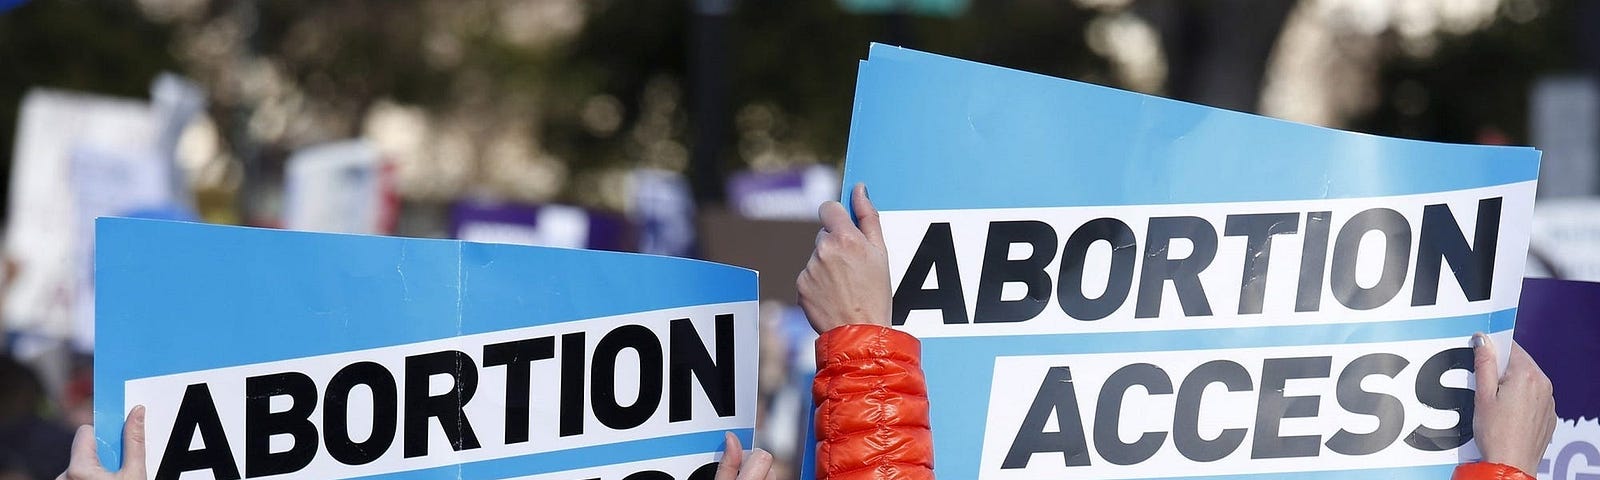 Two women holding up signs reading “Abortion Access.”